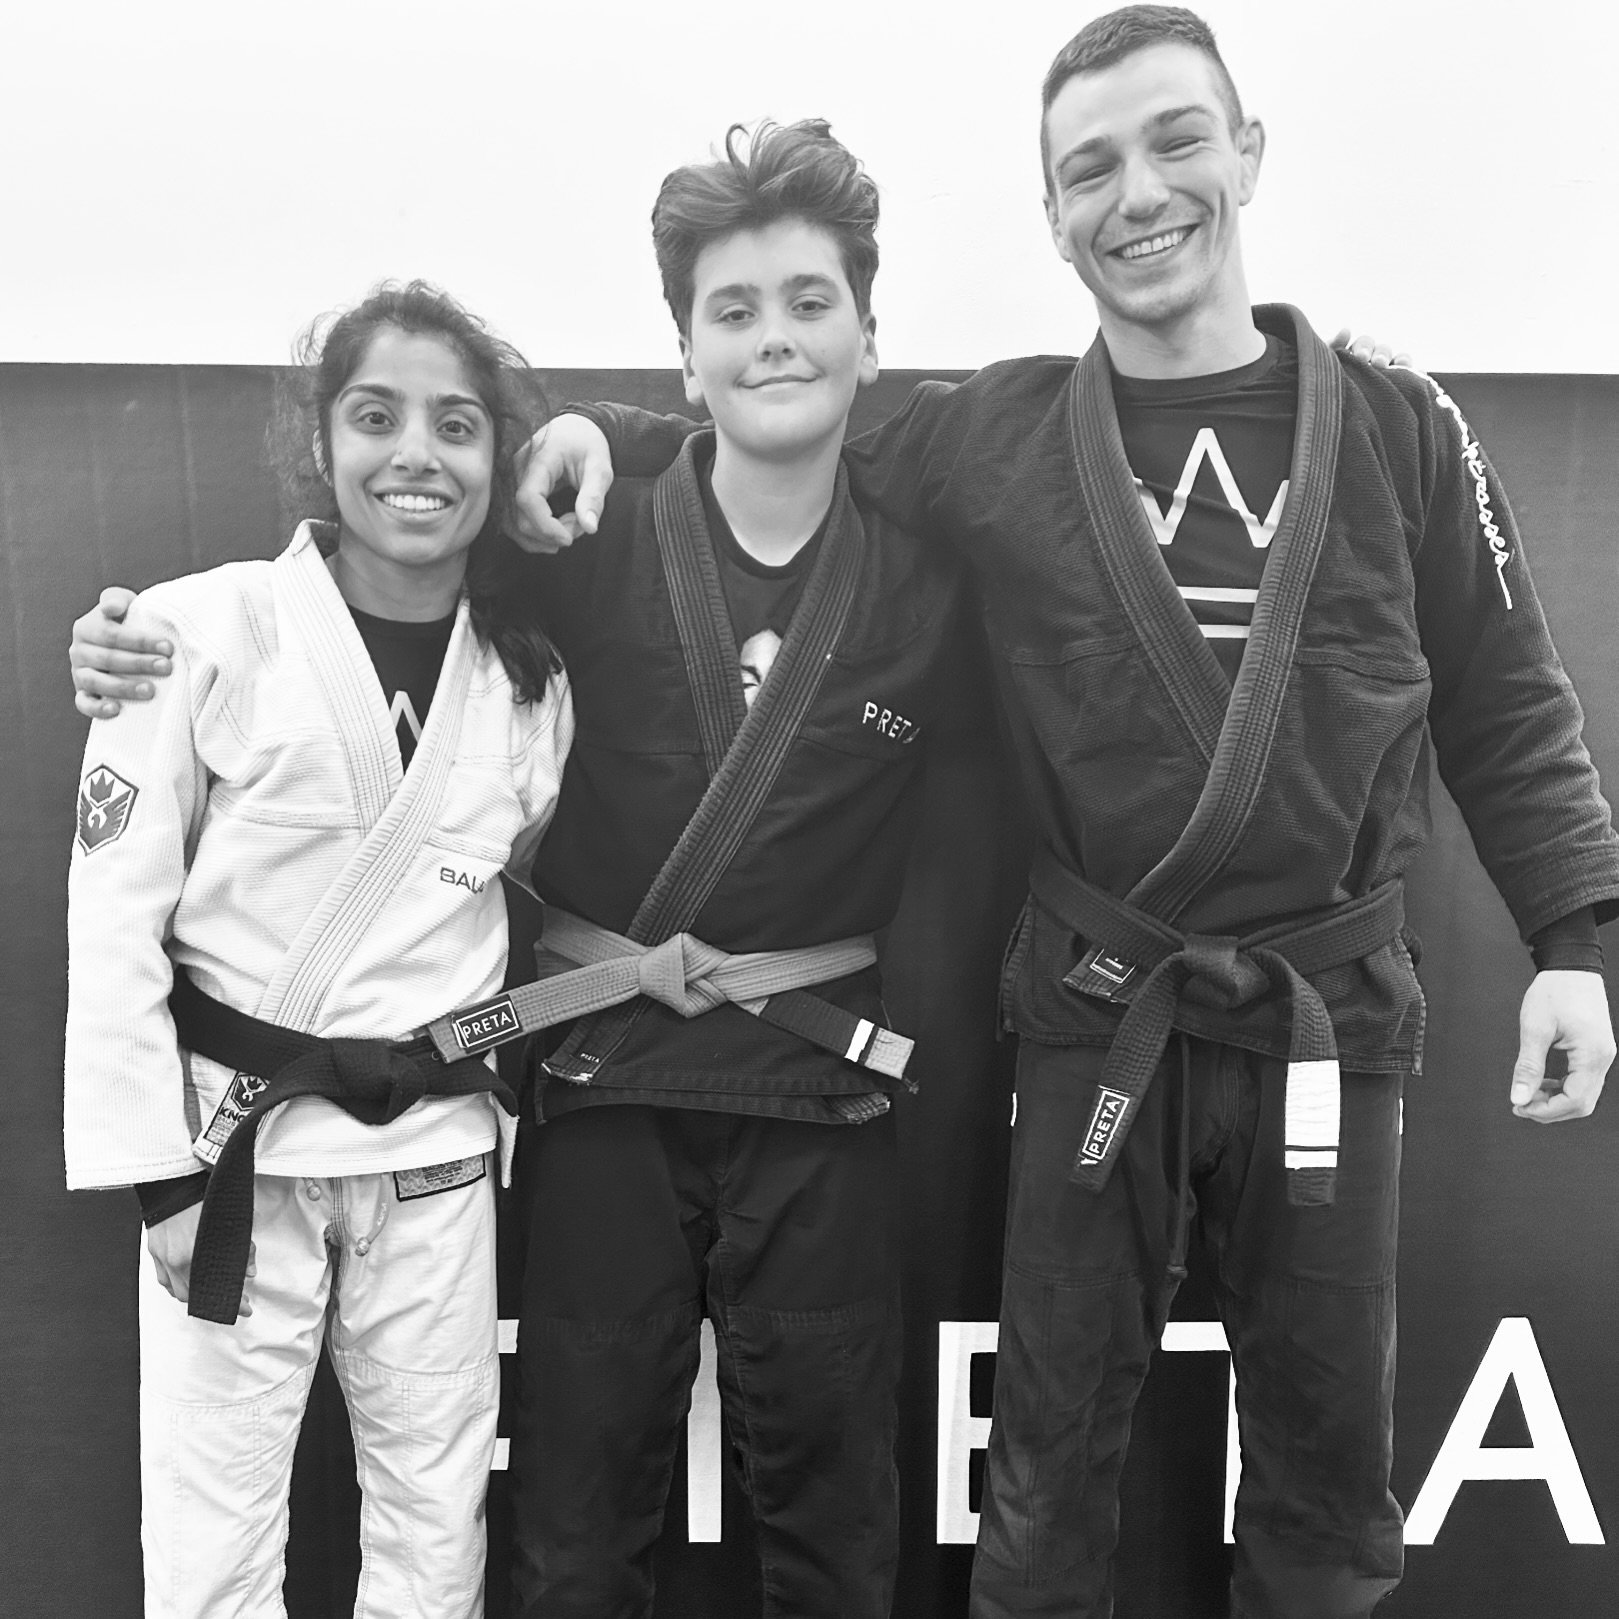 Congratulations to Alexander on earning his first stripe on the grey belt!

We have seen so much growth from this young man in the last year but his efforts have been shinning through even more so this past couple of months. 

We have been putting a 